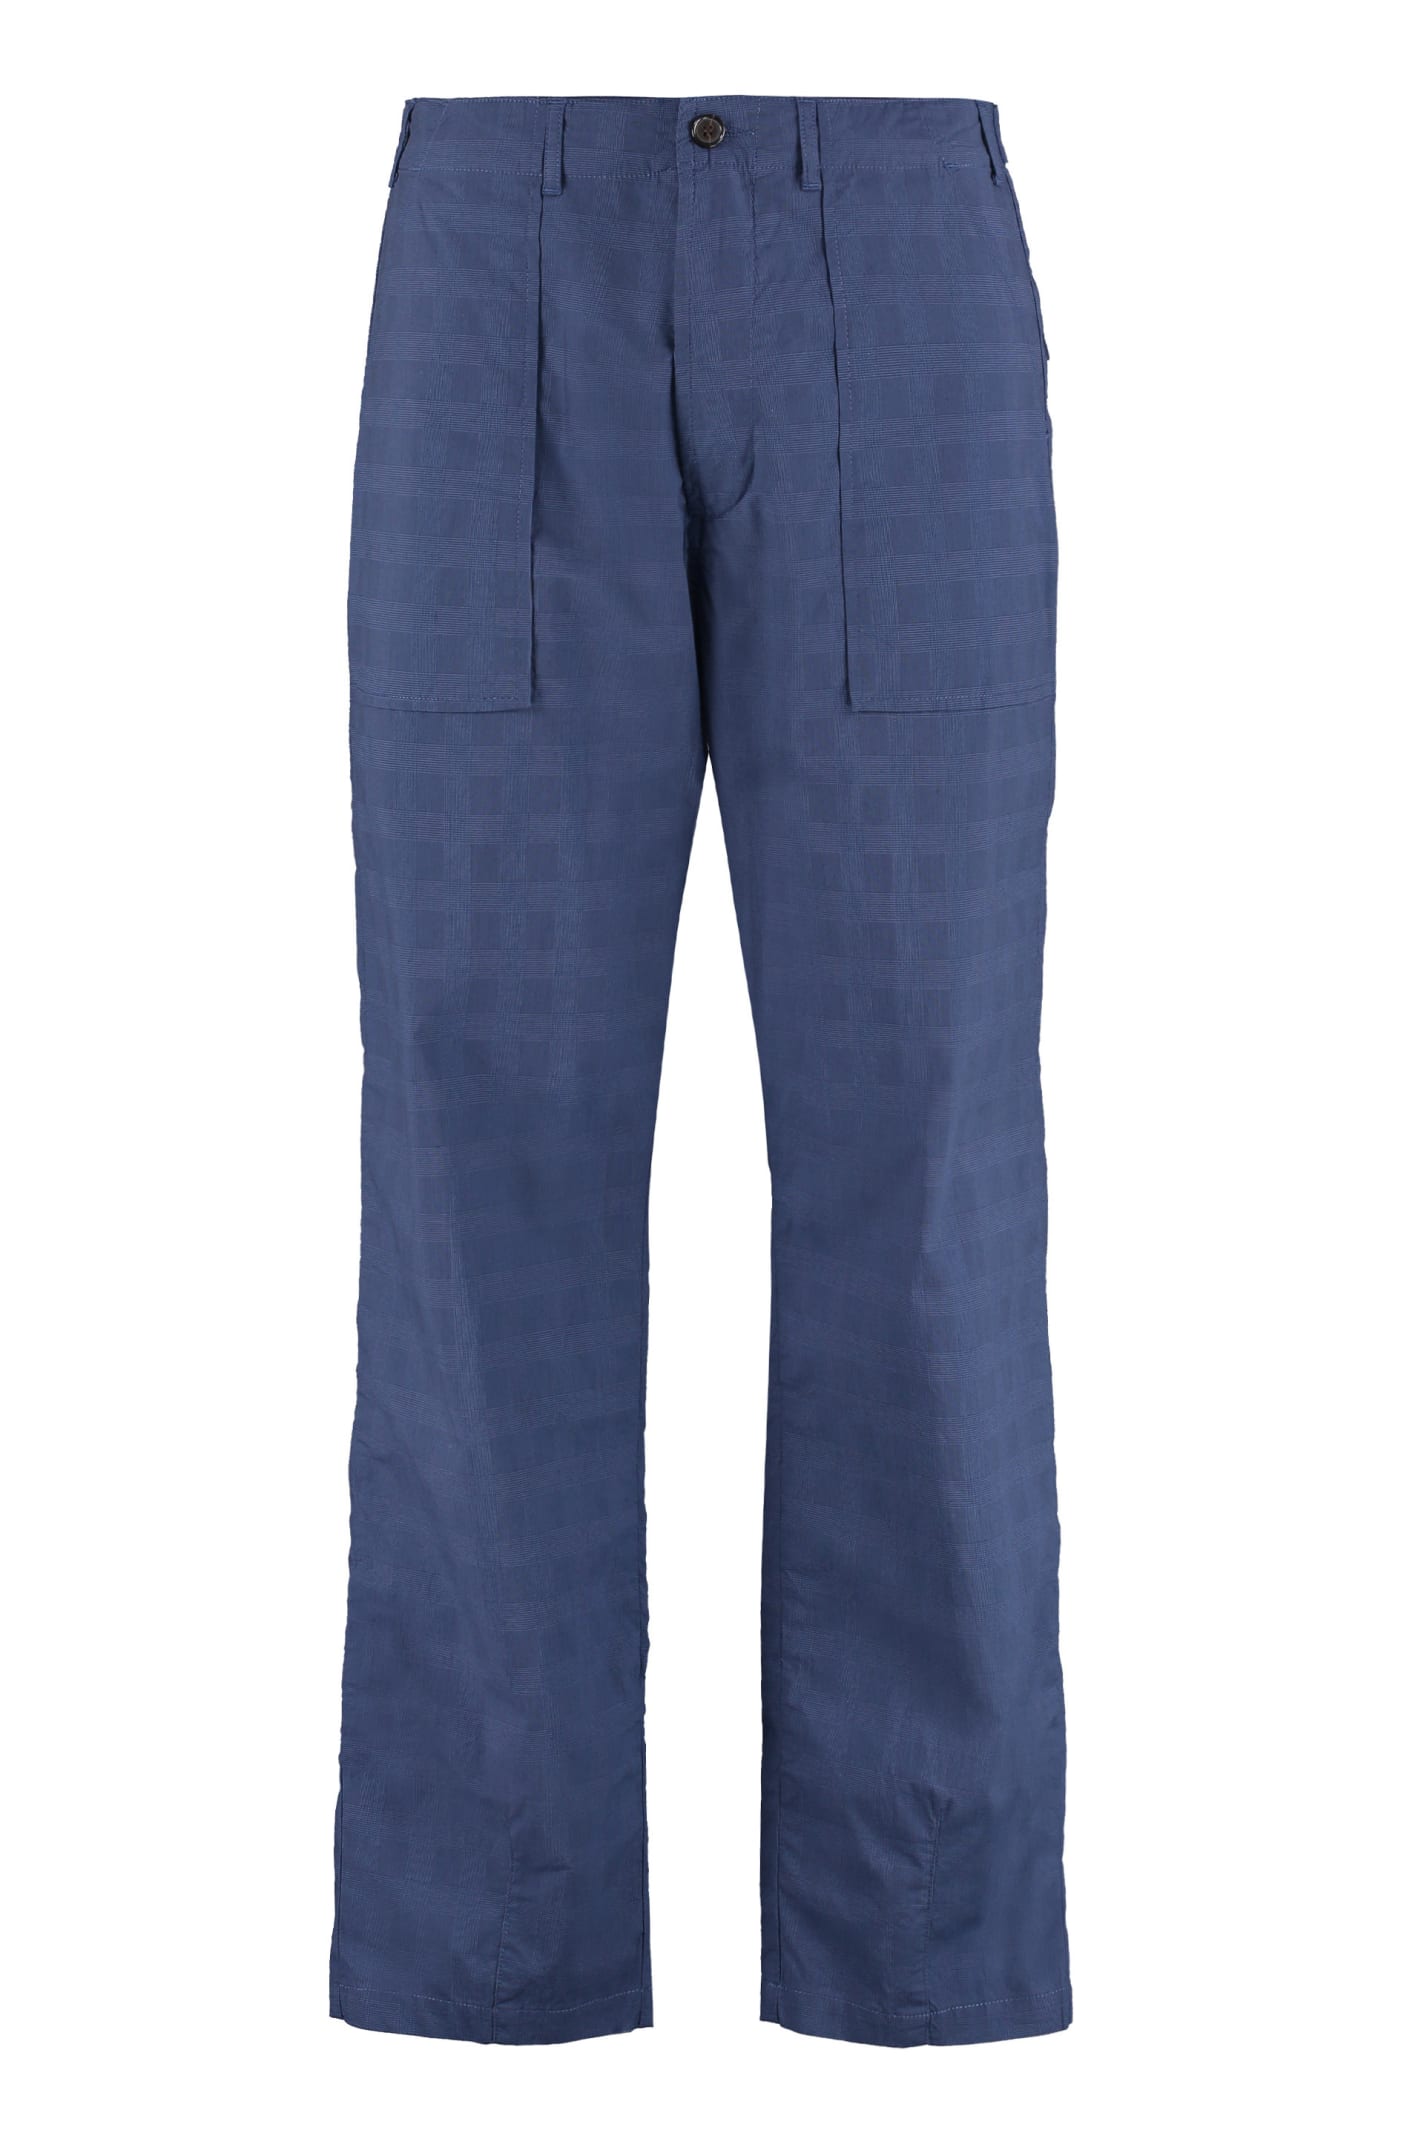 Universal Works Stretch Cotton Trousers